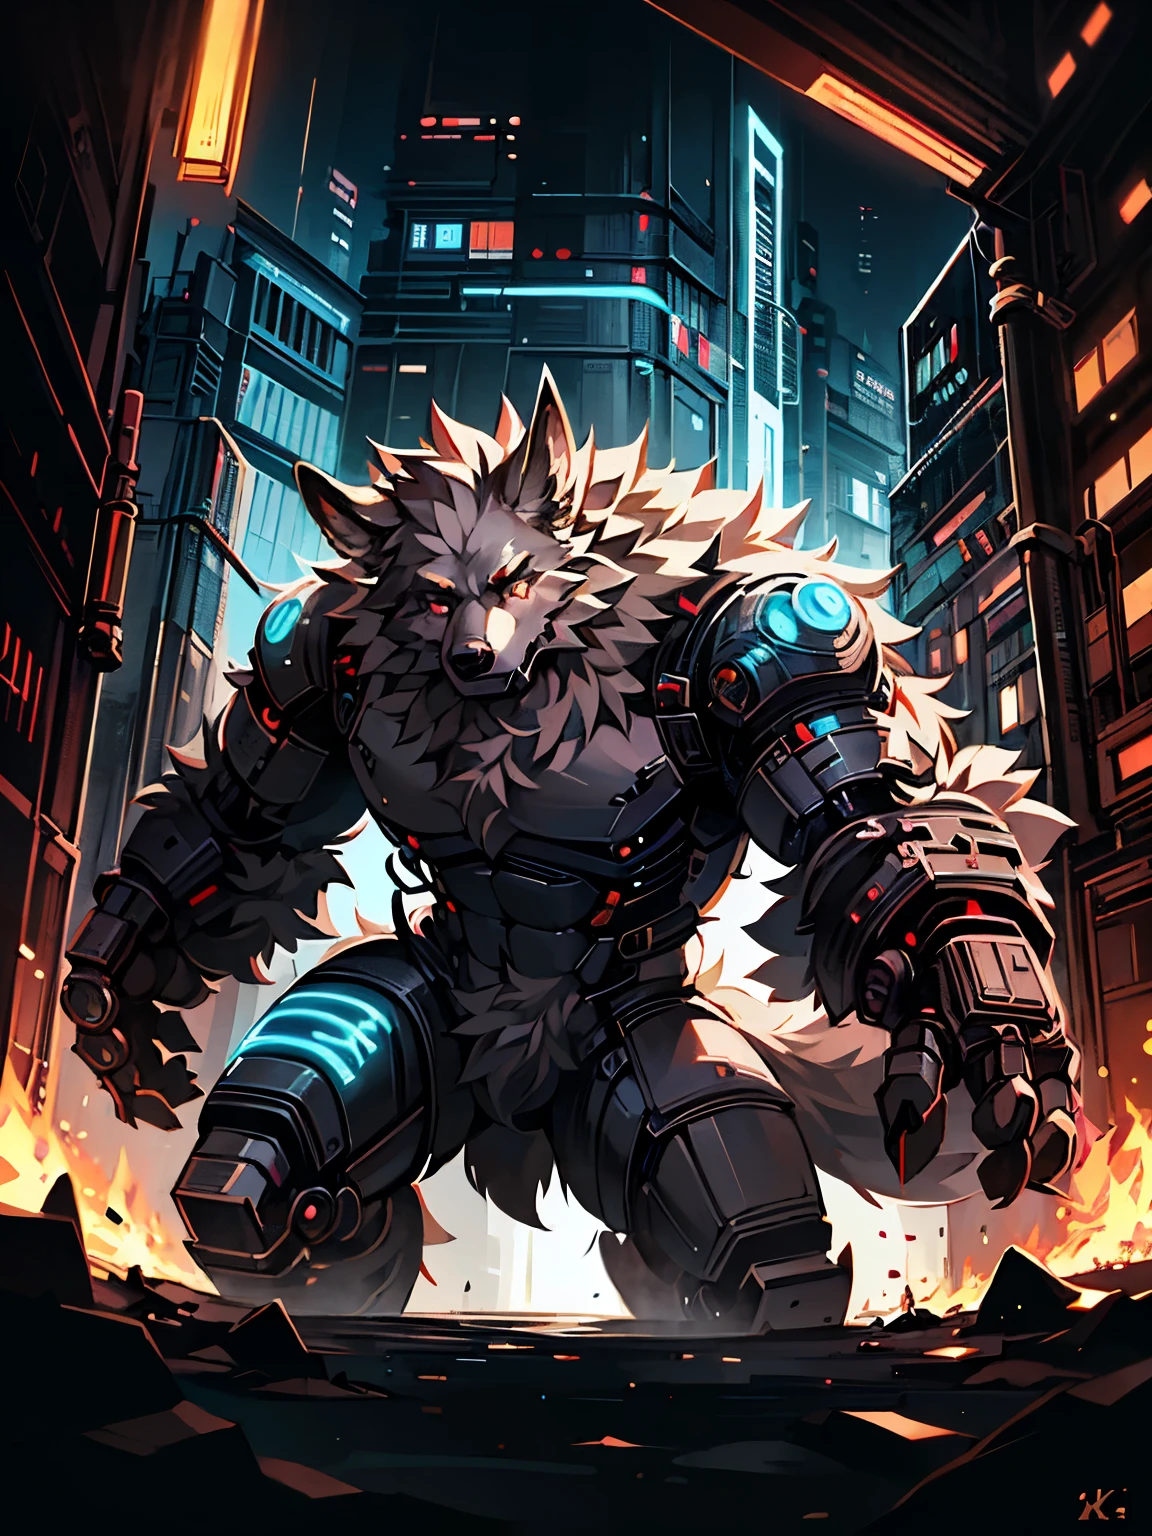 (best quality,4K,8k,high resolution,masterpiece:1.2),super detailed,actual,photoactual:1.37,Werewolf with prosthetics cyberpunk style actual scan, HD Surrealism combat Explanation: 1. (best quality,4K,8k,high resolution,masterpiece:1.2): Used to express high quality standards for generated images。 2. super detailed: Describing images needs to be very detailed，Show details clearly。 3. actual,photoactual:1.37: Description Generated images need to appear actual and photo-like。 4. Werewolf with prosthetics: Werewolves and prosthetics，This is the subject of the picture。Describe a mechanized werewolf，Features of prosthetics。 5. cyberpunk style: cyberpunk style，The artistic style used to describe the image。 6. HD Surrealism combat: Description picture HD、Surrealism、battle scene。 